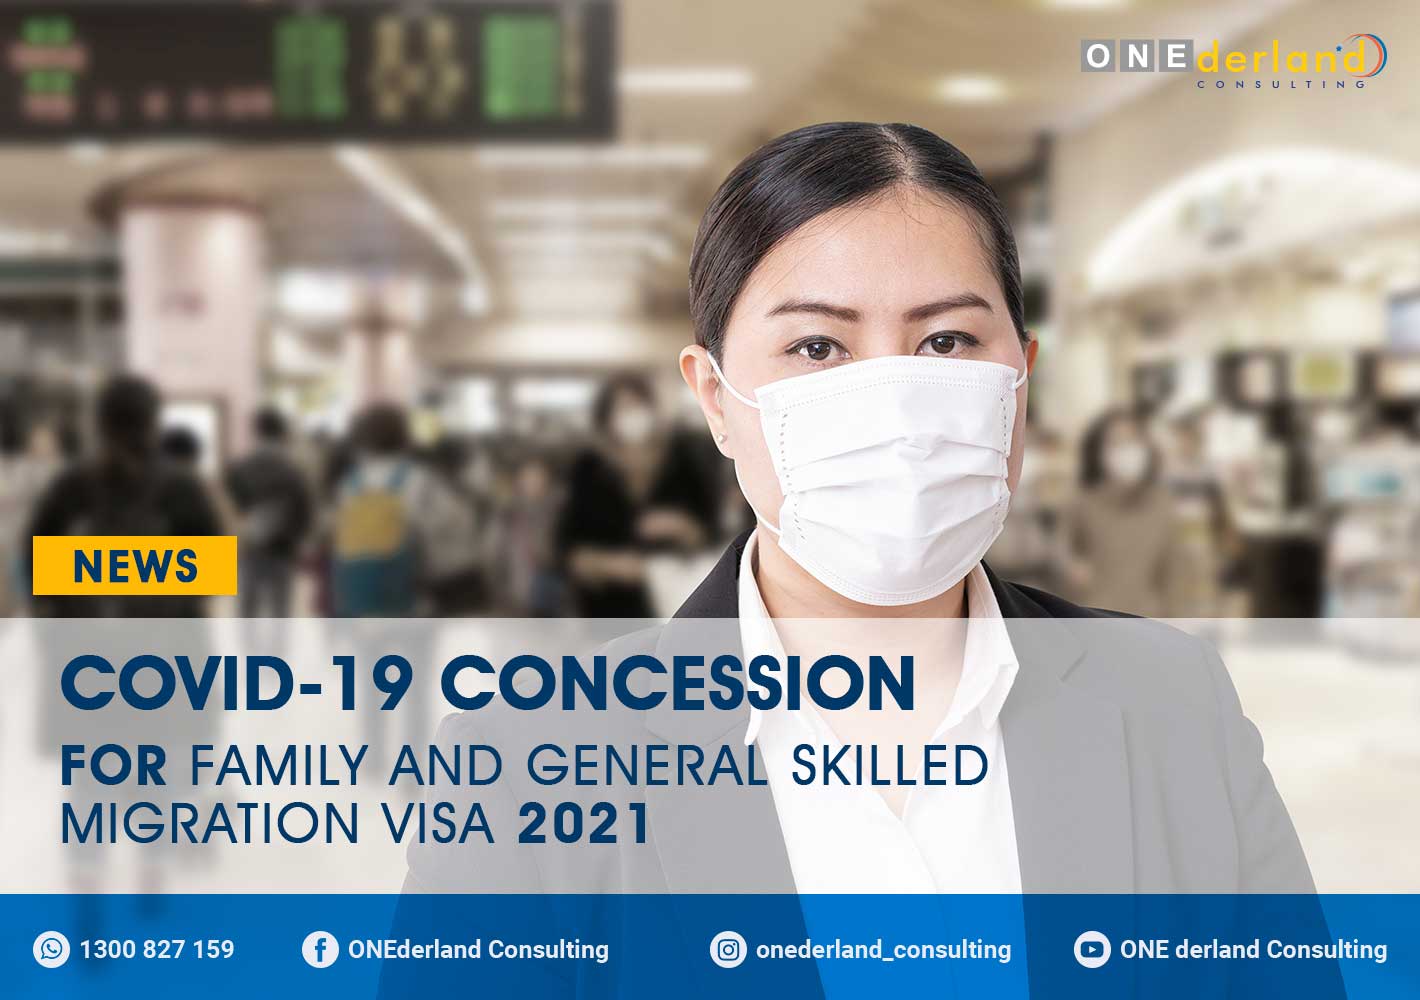 COVID-19 Concession for Family and General Skilled Migration Visa 2021